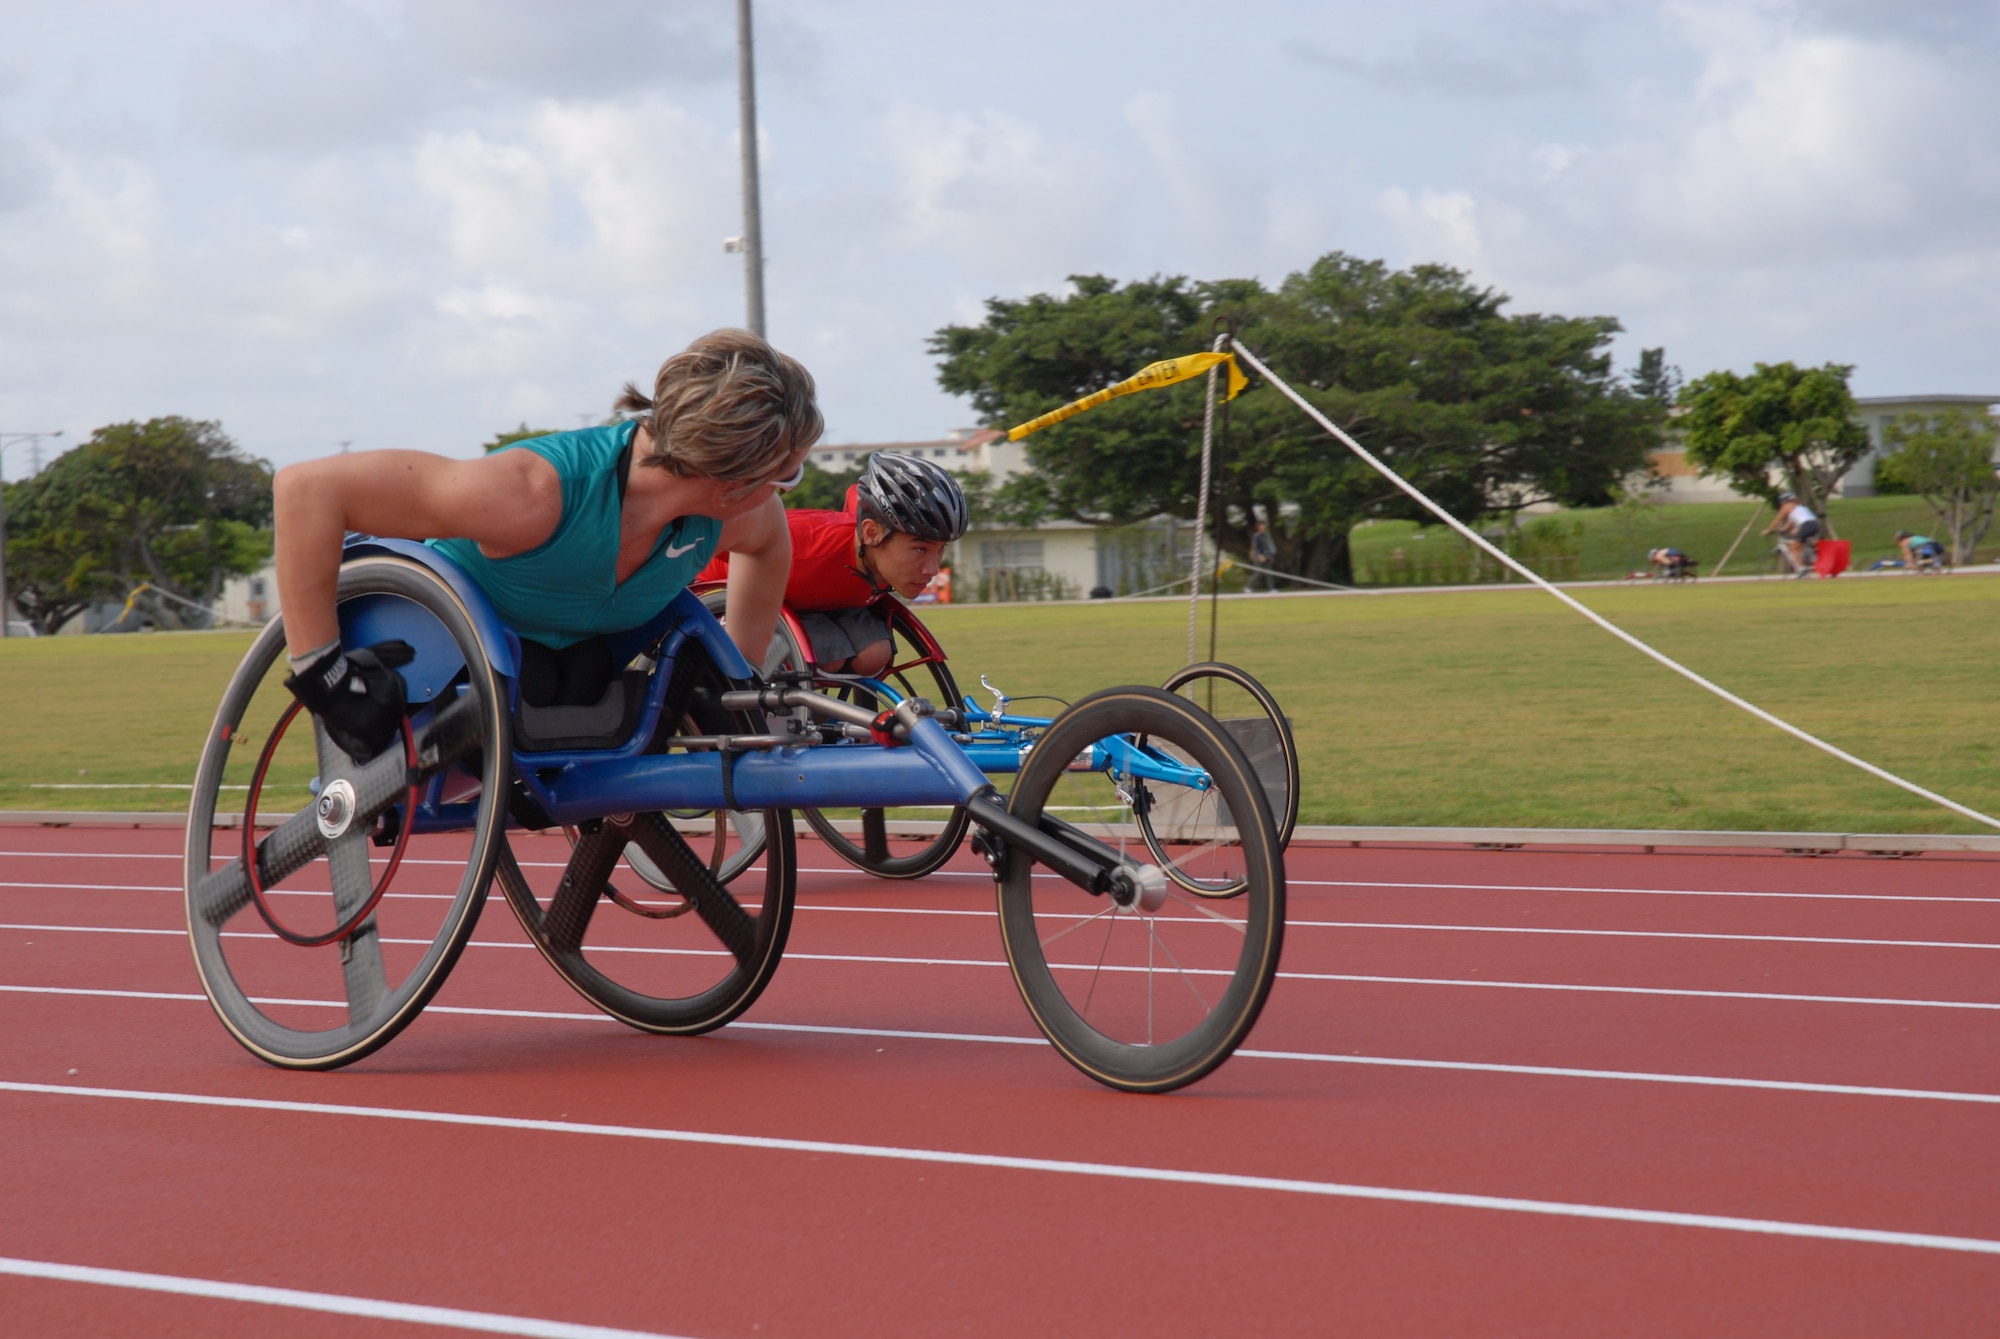 U.S. Paralympian Cheri Blauwet pushes teammate Tyler Byers during a training
session at the Ryukyu Middle school track at Kadena Air Base, Japan on Aug.
27. More than 100 athletes and support staff from the U.S. Paralympic
track and field and swim teams arrived at Kadena Aug. 24 to live and train
for the next ten days in preparation for the 2008 Paralympic Games held in
Beijing, China Sept. 6-17. (U.S. Air Force photo/Airman 1st Class Chad
Warren)